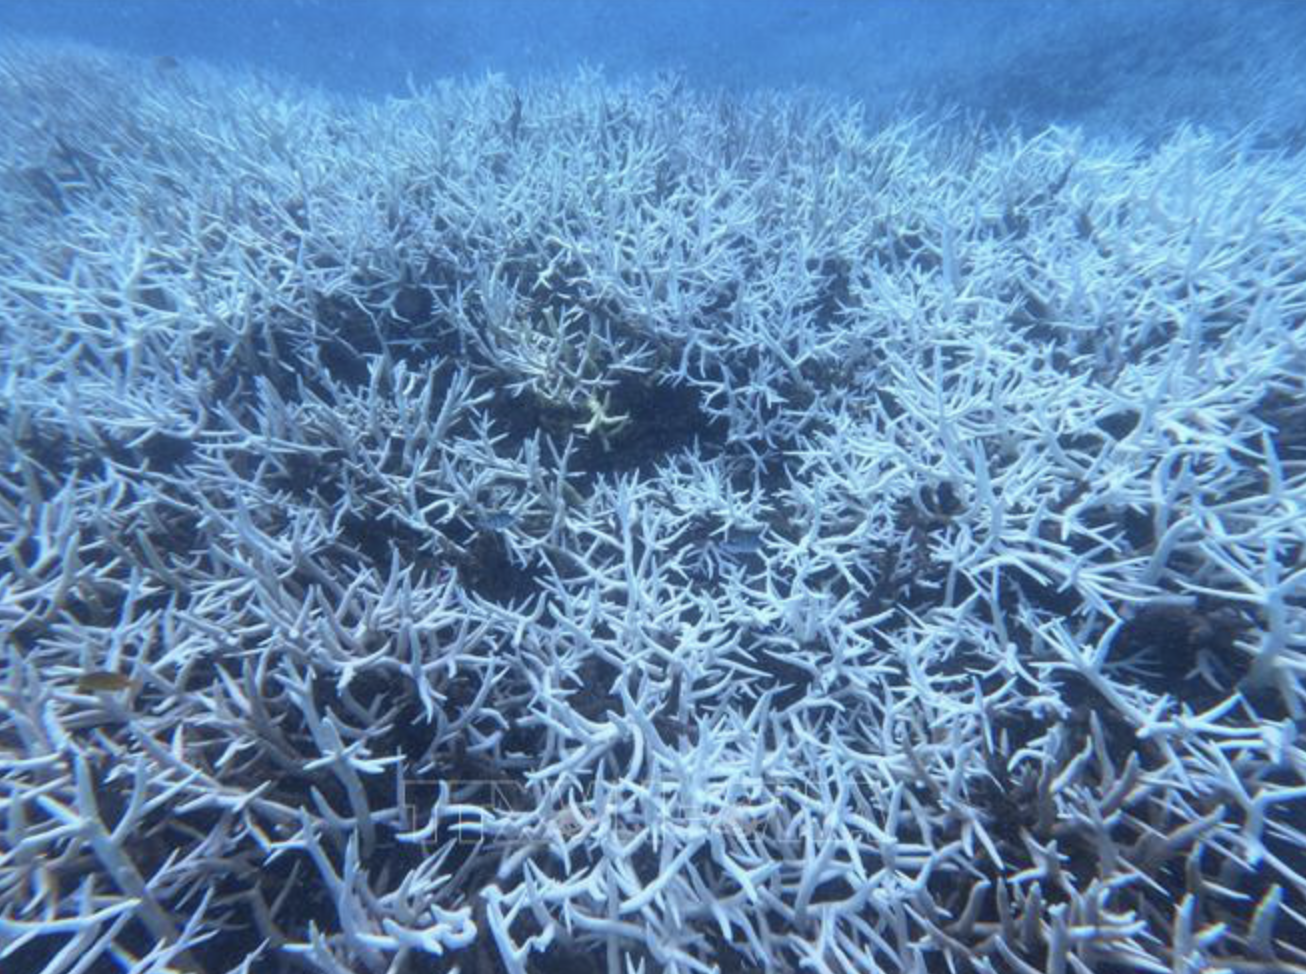 Coral bleaching requires reduction in seafood exploitation, diving in Vietnam’s Con Dao Archipelago